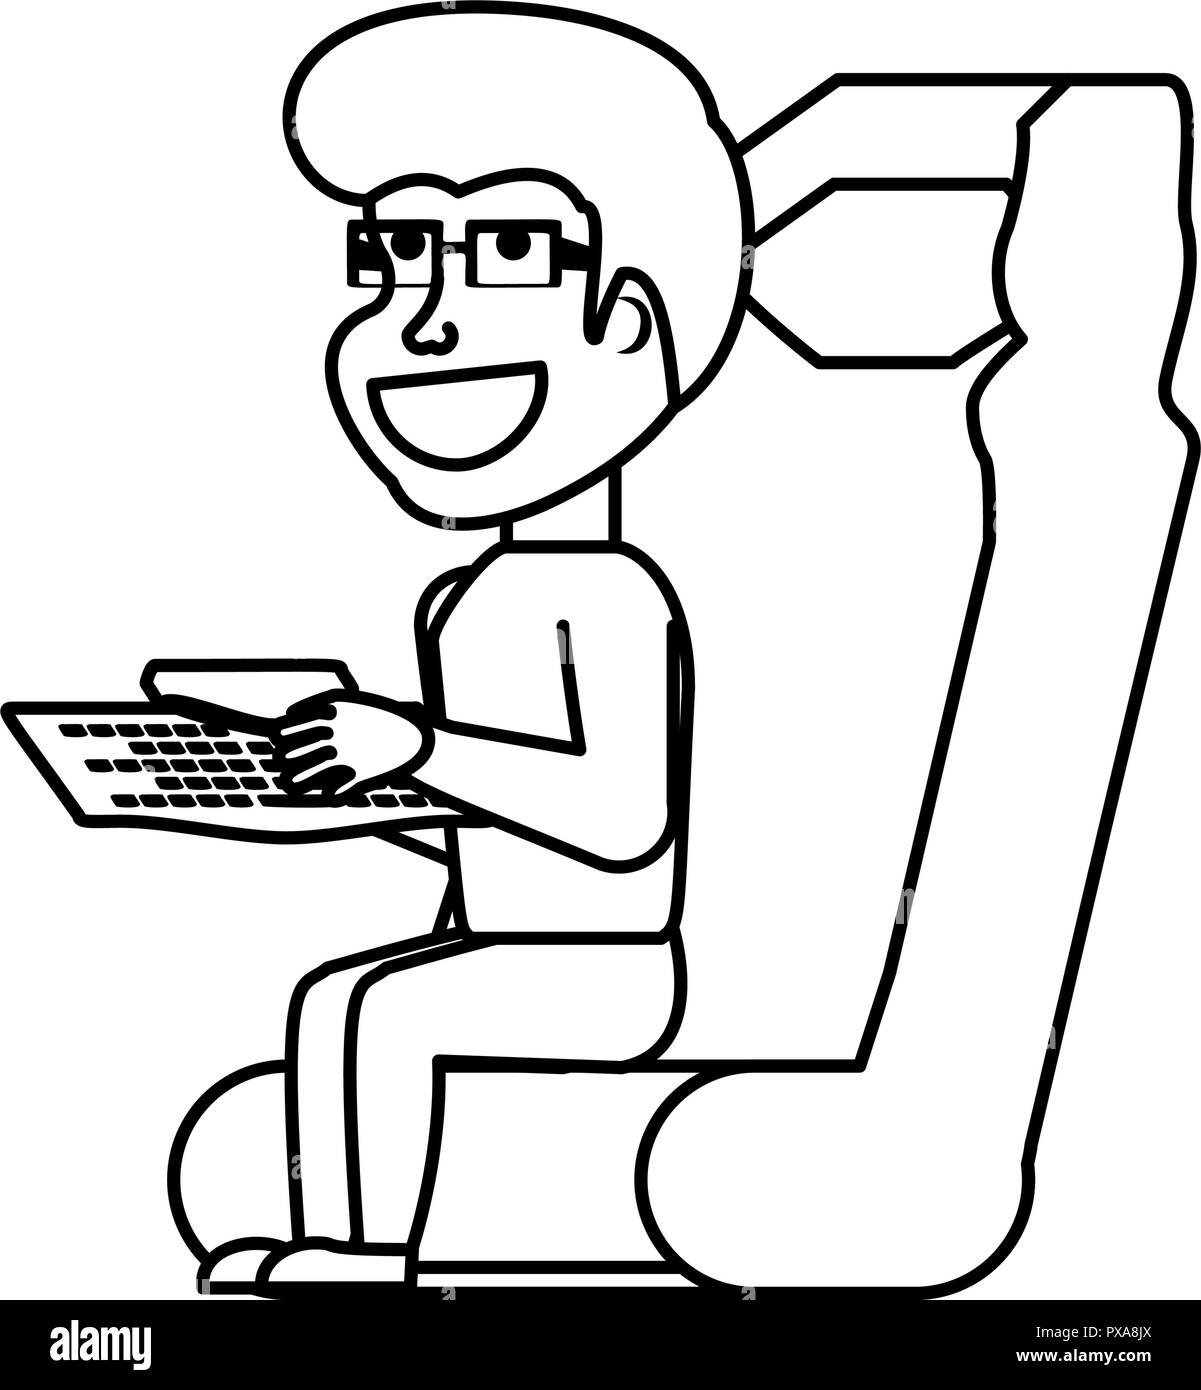 Buy vector boy sitting playing video game royalty-free illustration